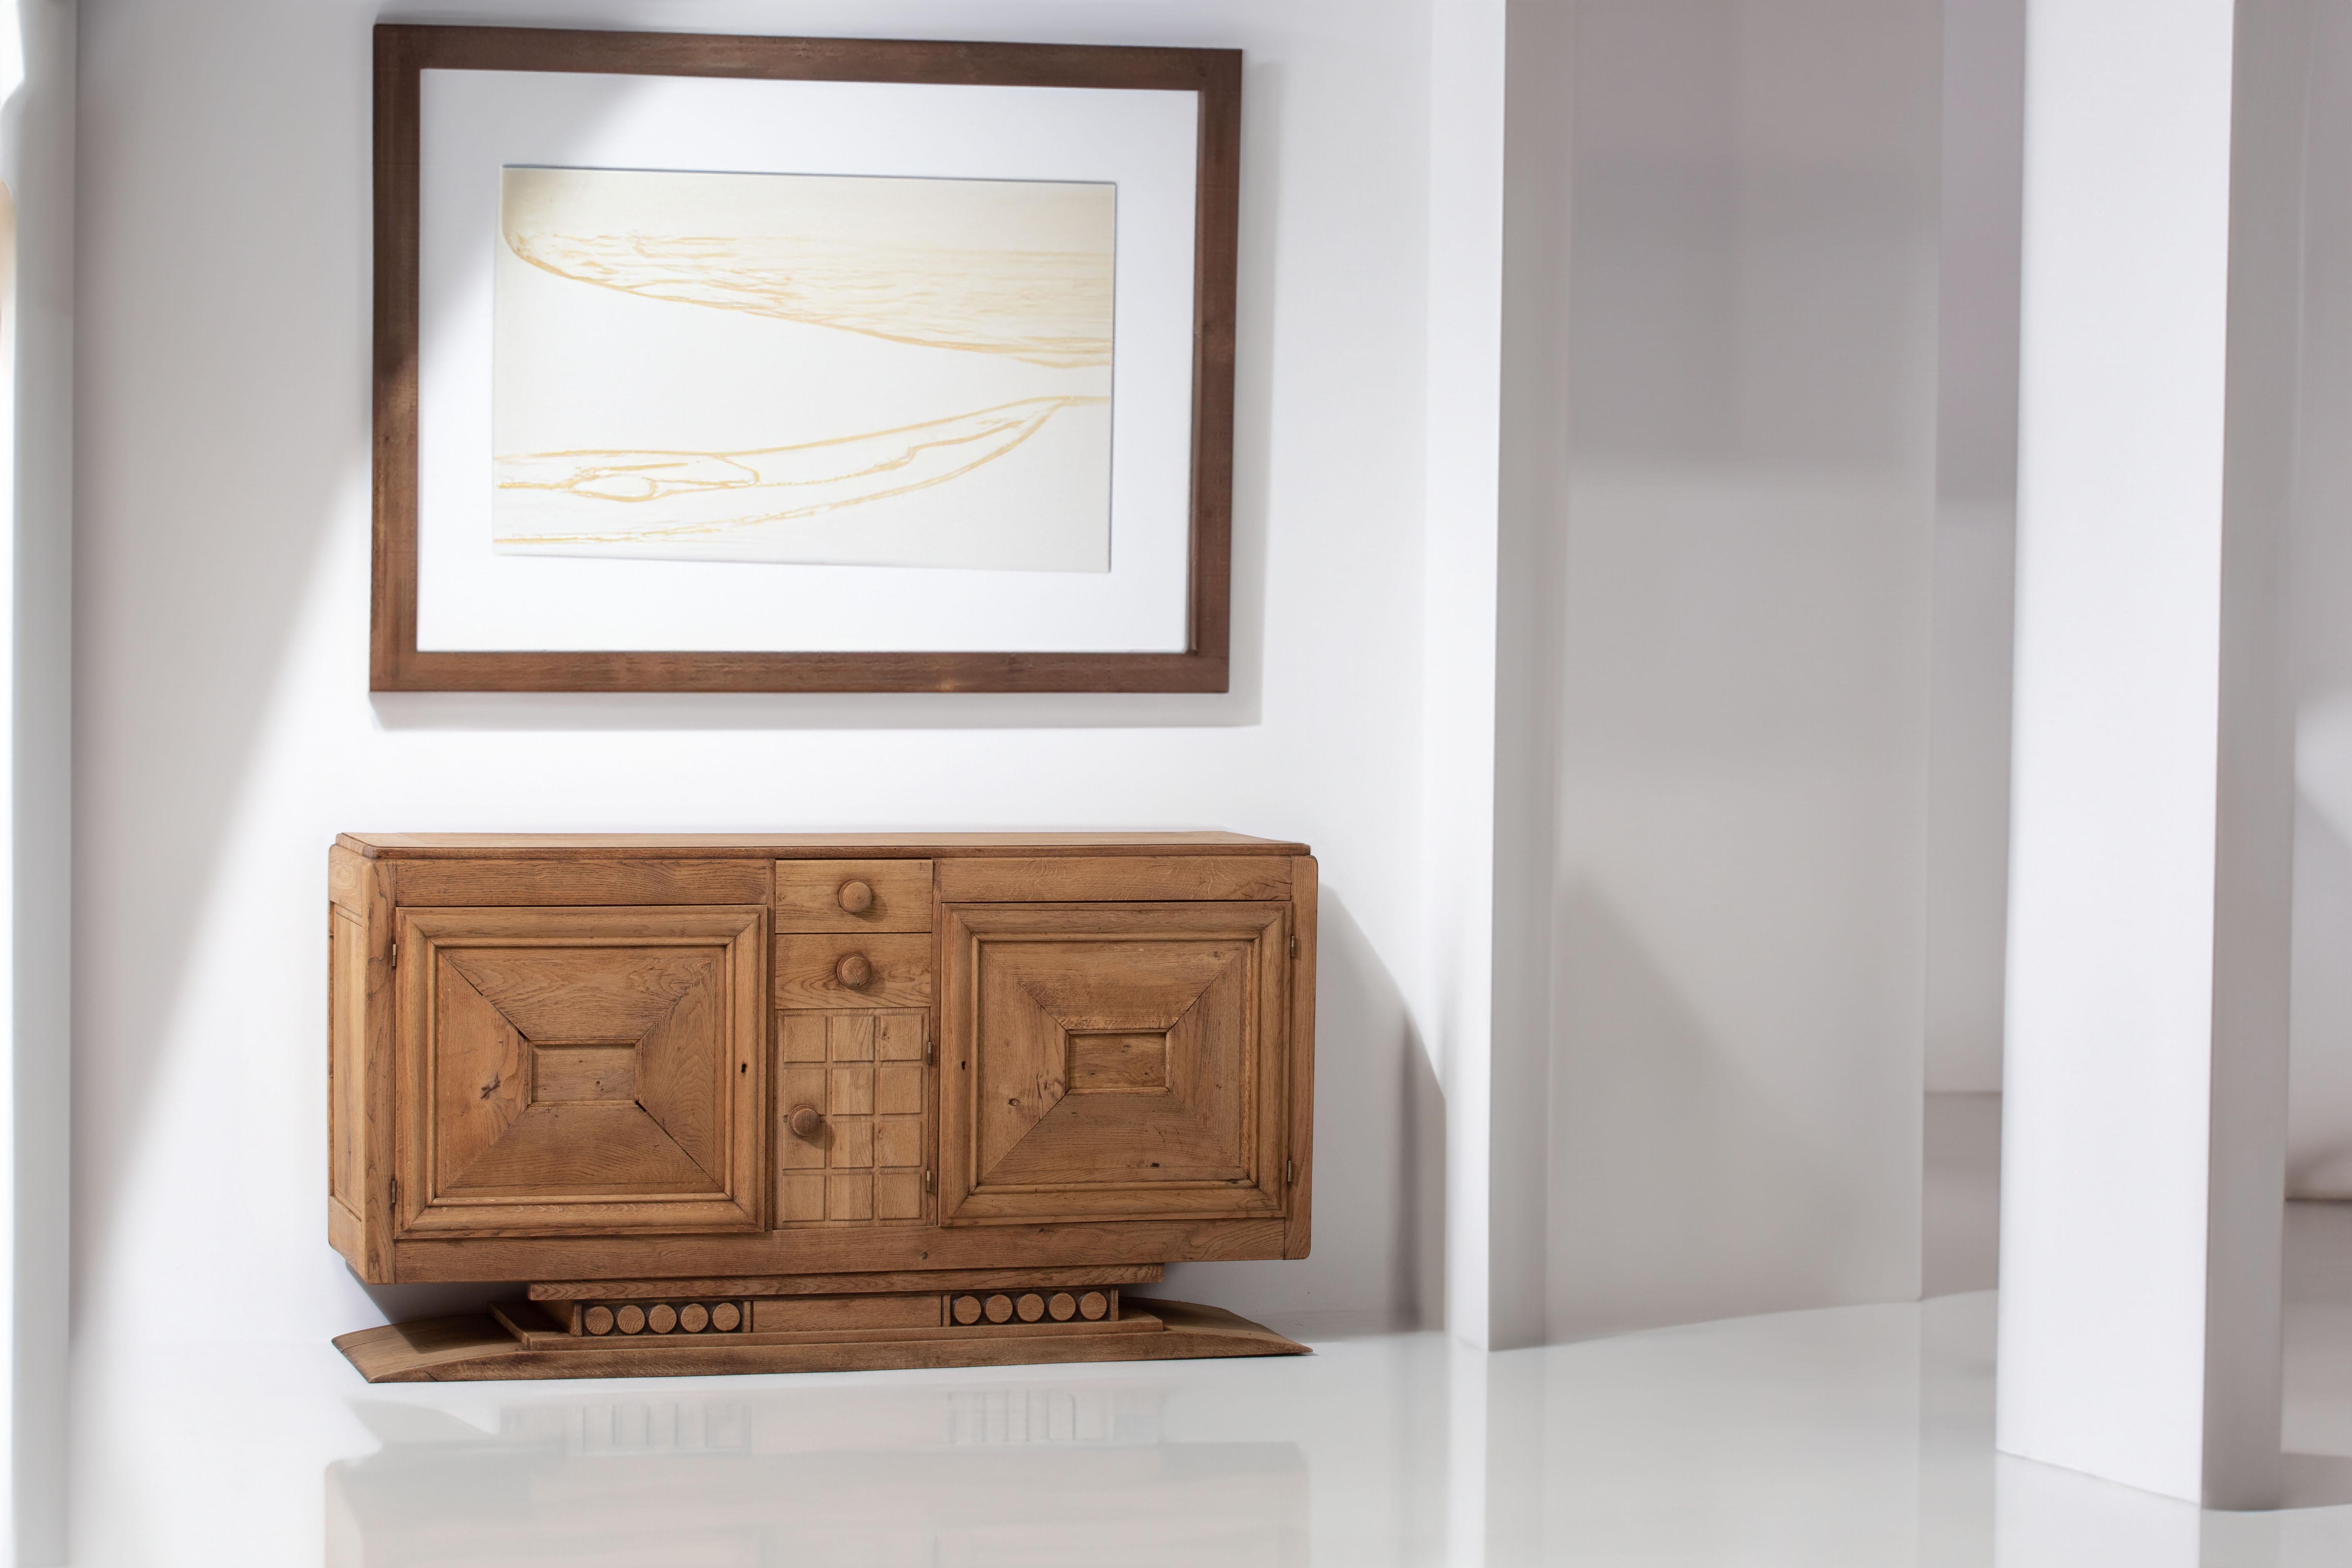 Introducing a captivating Art Deco credenza crafted in France during the 1940s. This impressive sideboard draws inspiration from the renowned French design duo Andre Domin and Marcel Genevriere, particularly their iconic sideboard showcased at the